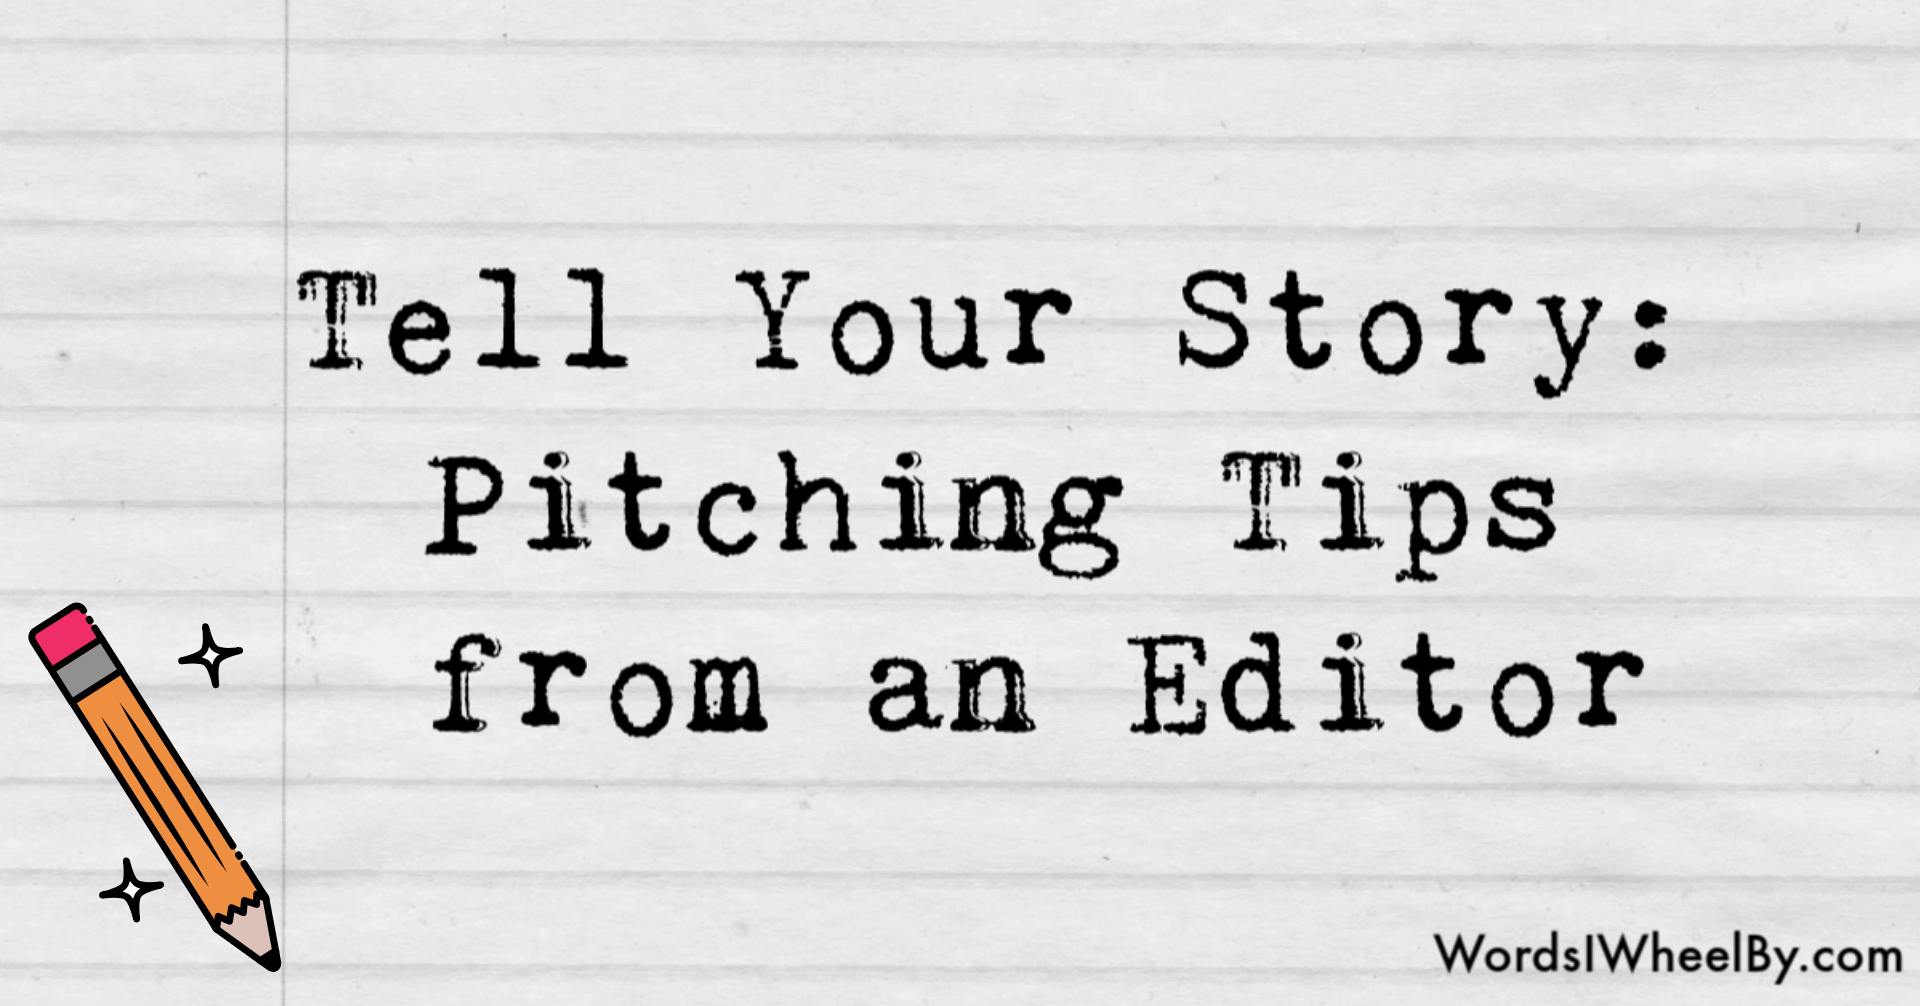 A lined paper background with words in a typewriter font that read "Tell your story: pitching tips from an editor." There is a small illustration of a yellow pencil in the bottom left corner. In the bottom right corner it says wordsiwheelby.com